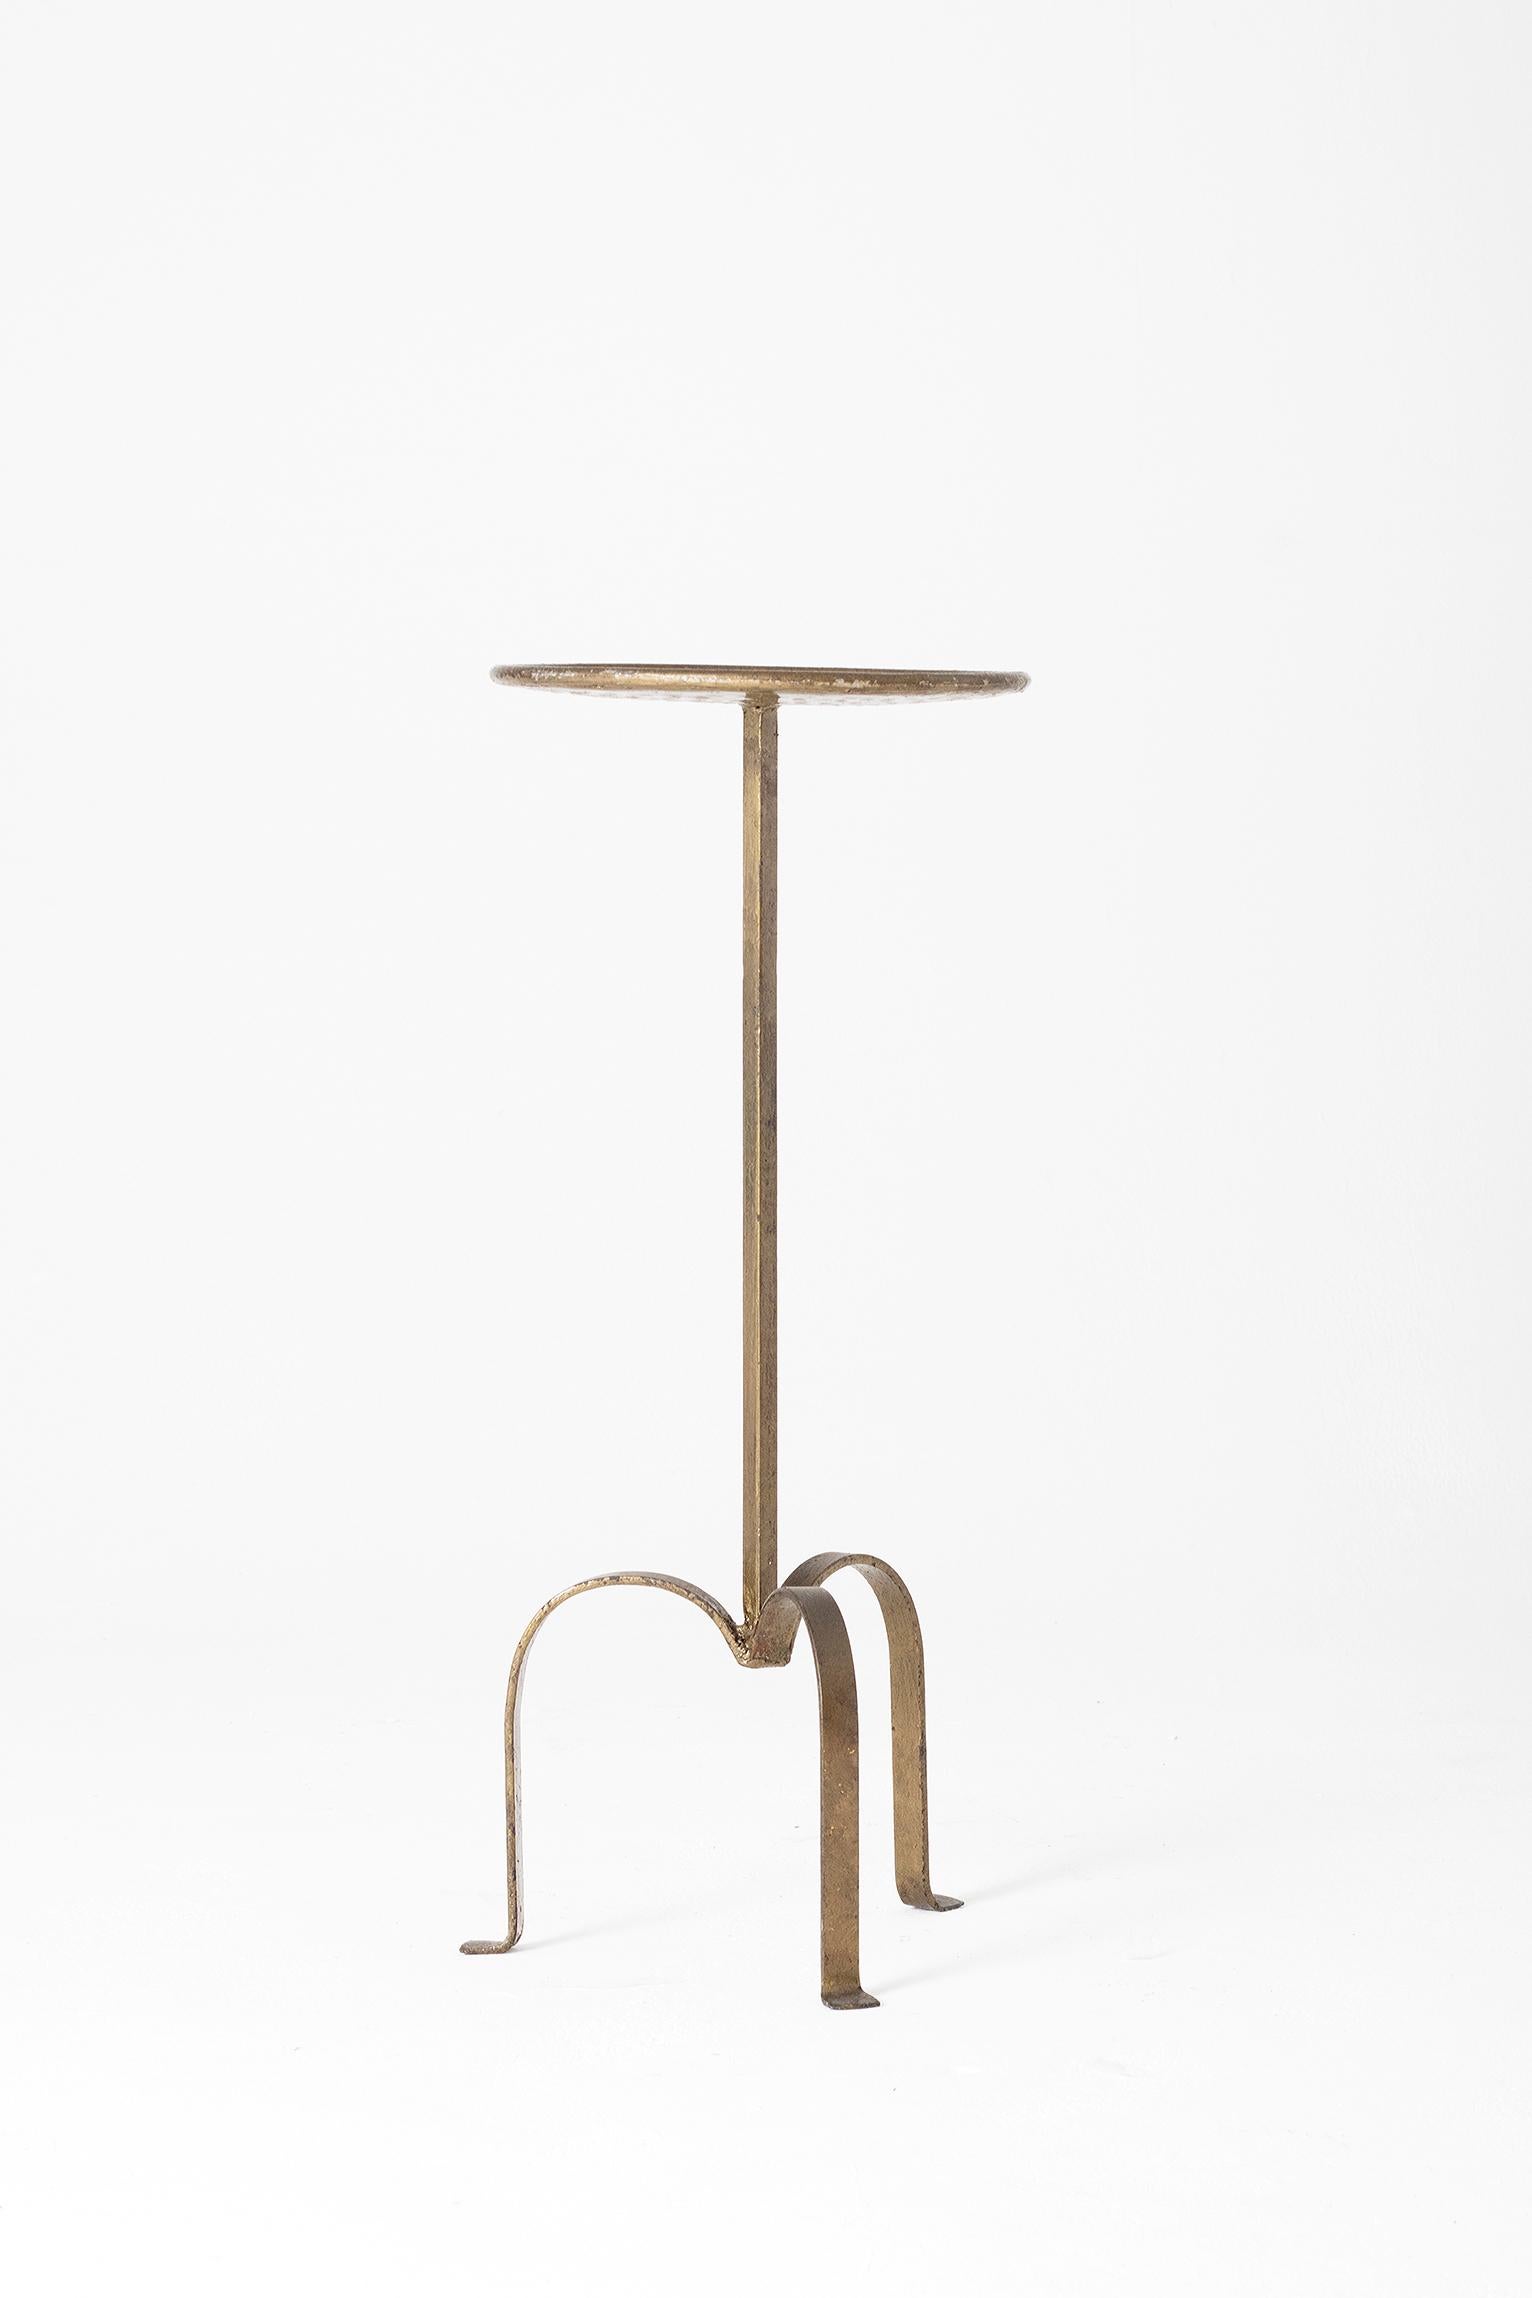 A gold patinated wrought iron martini table
Spain, second half of the 20th century.